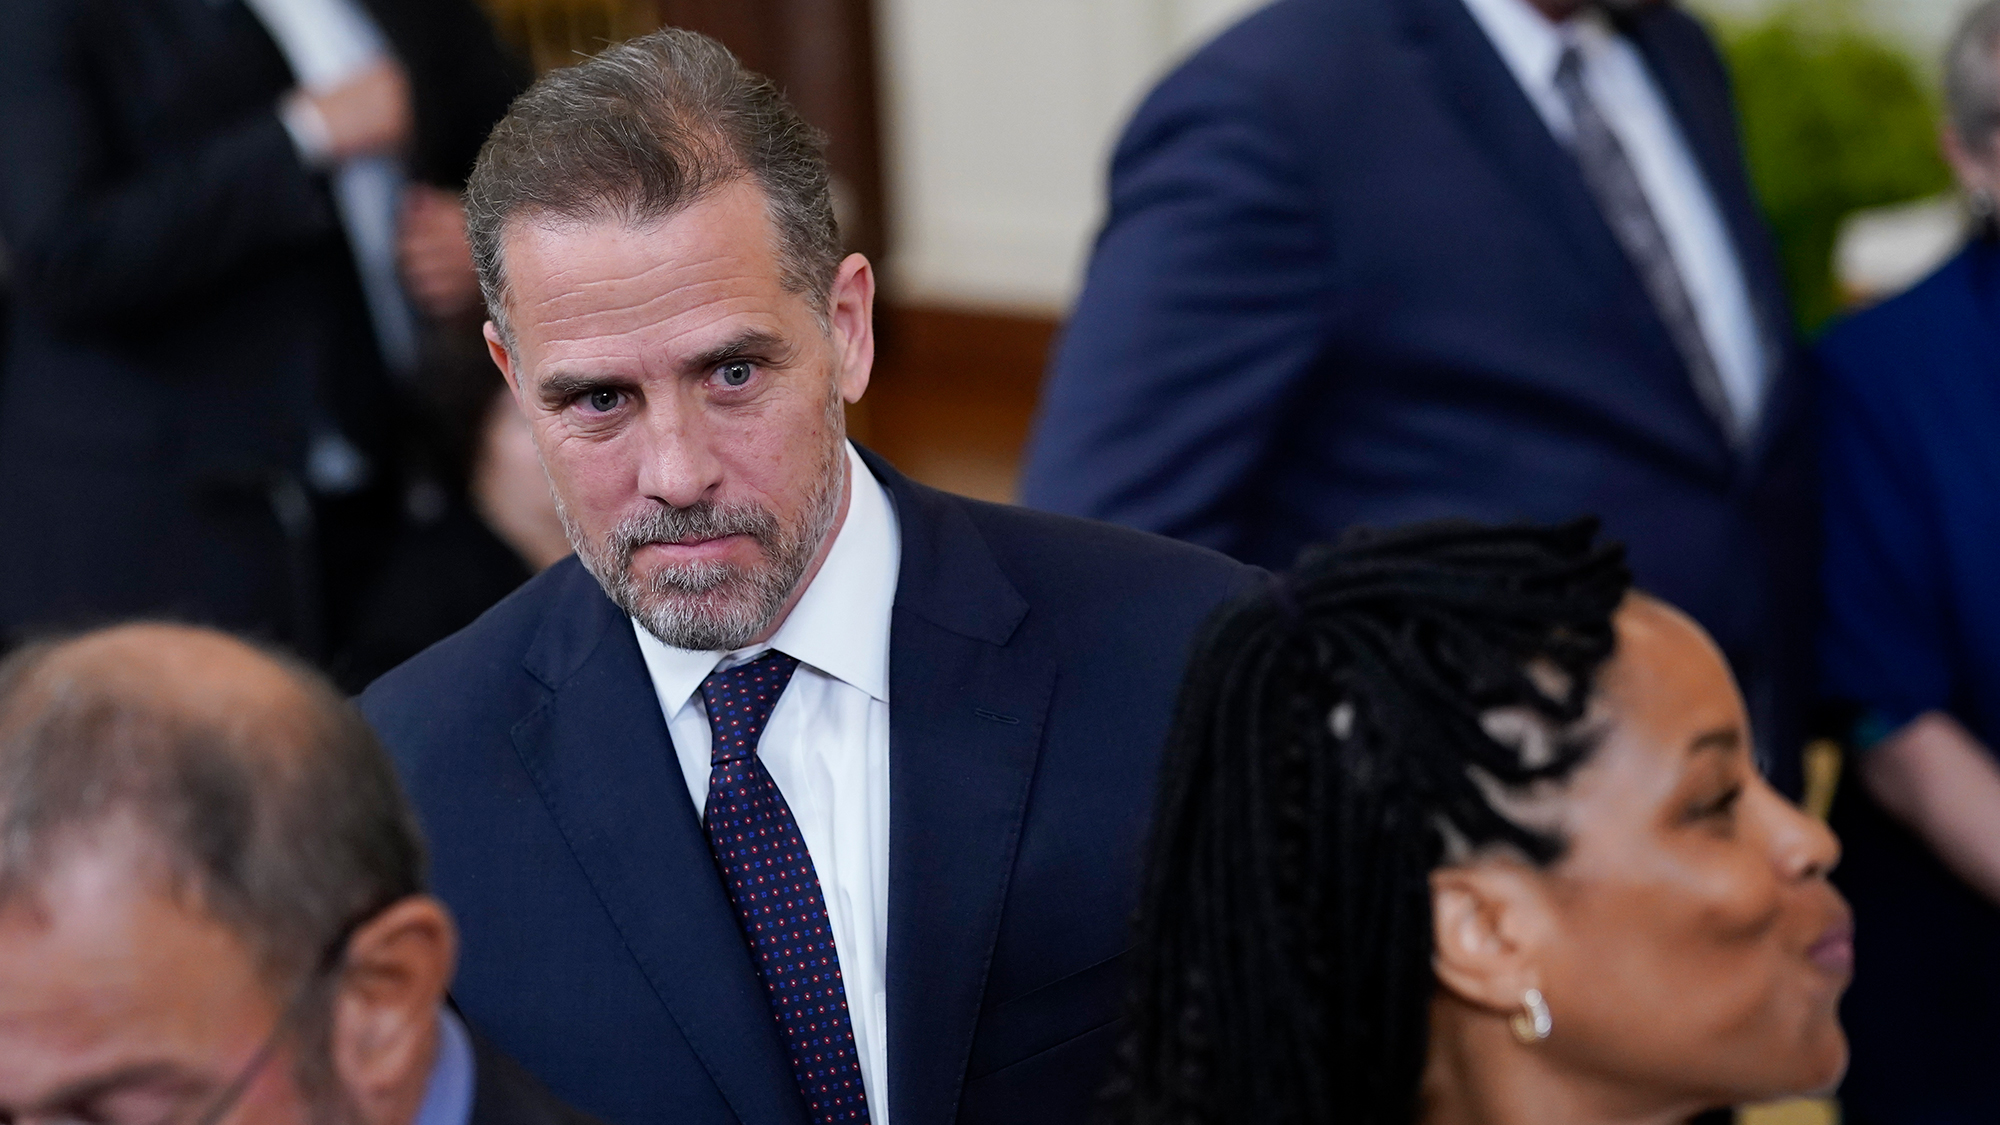 Hunter Biden sues computer repair shop owner, accusing him of trying to invade his privacy